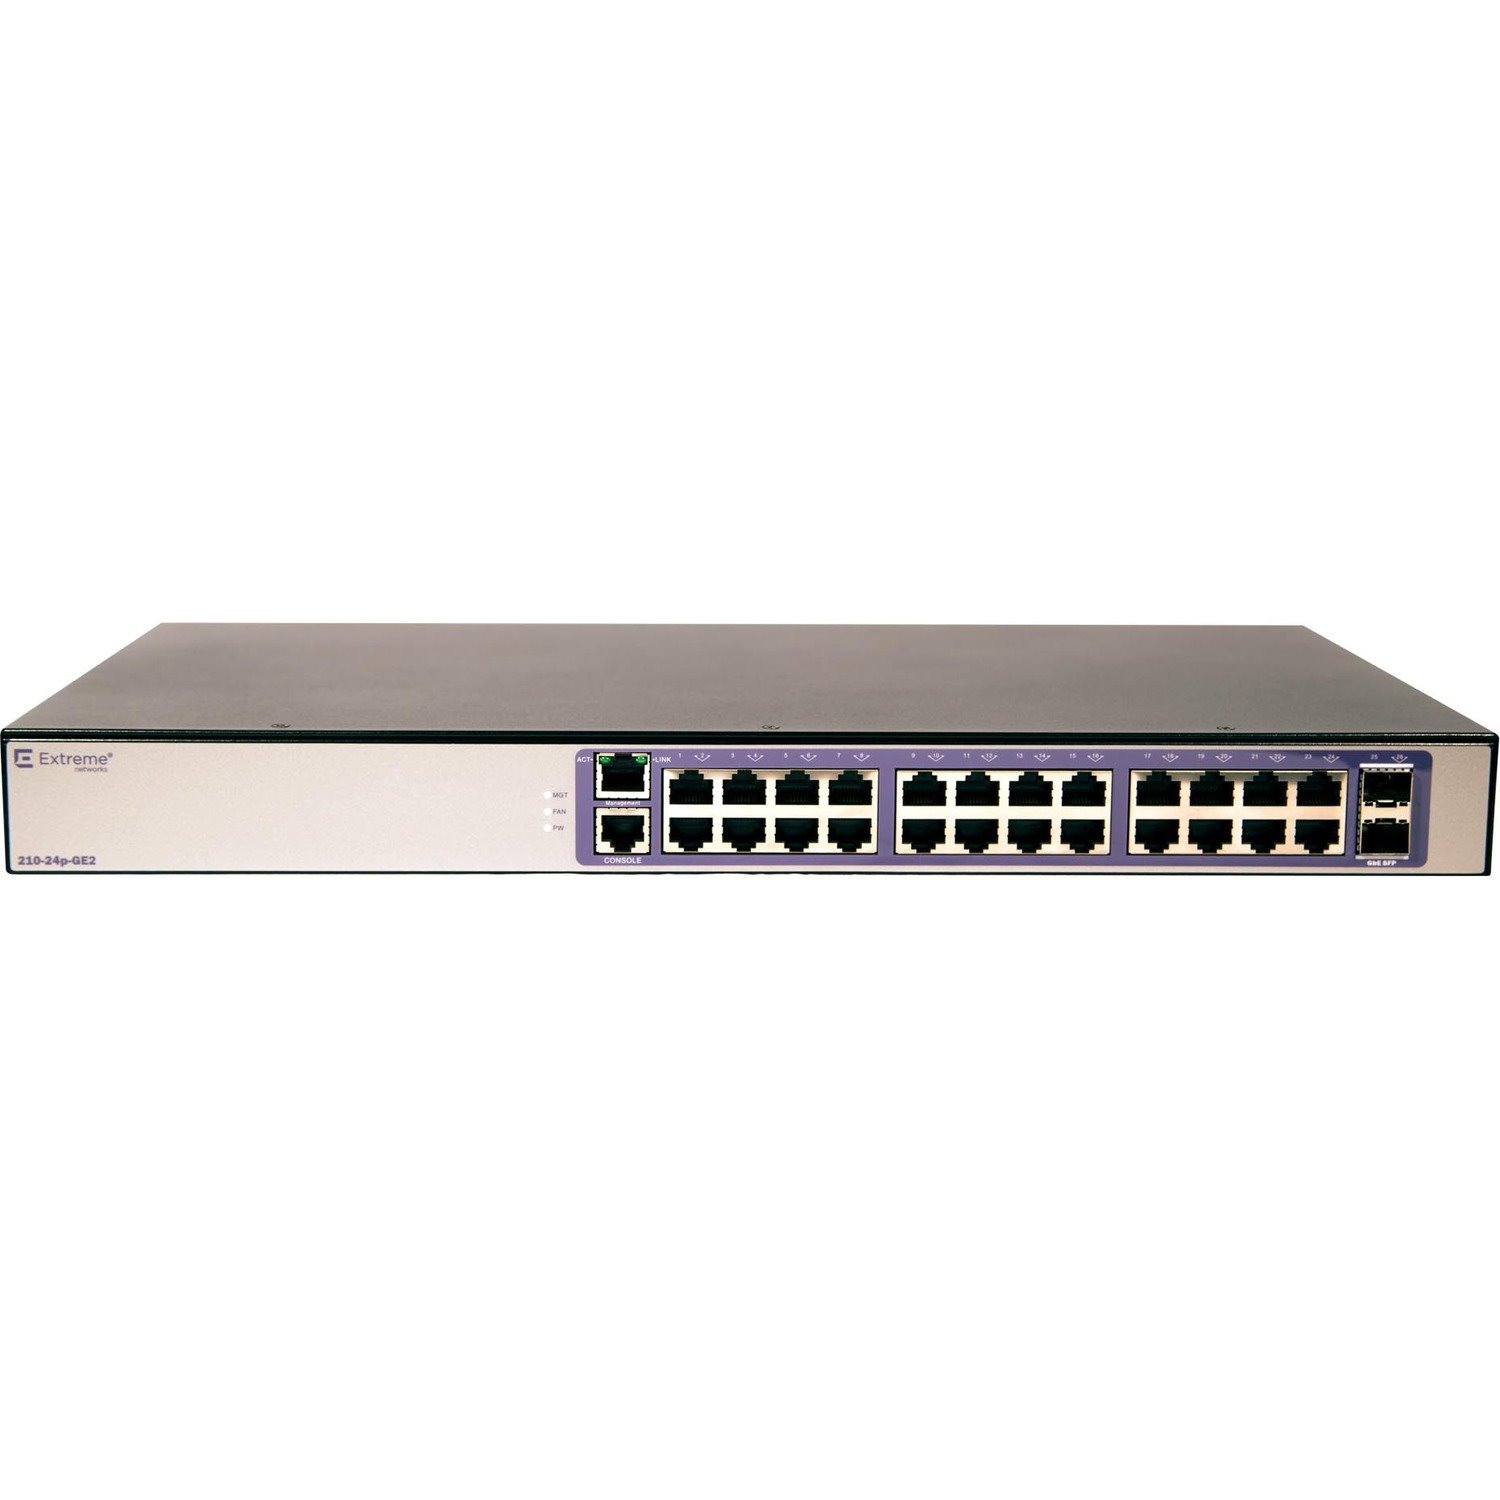 Extreme Networks 210-24p-GE2 Ethernet Switch